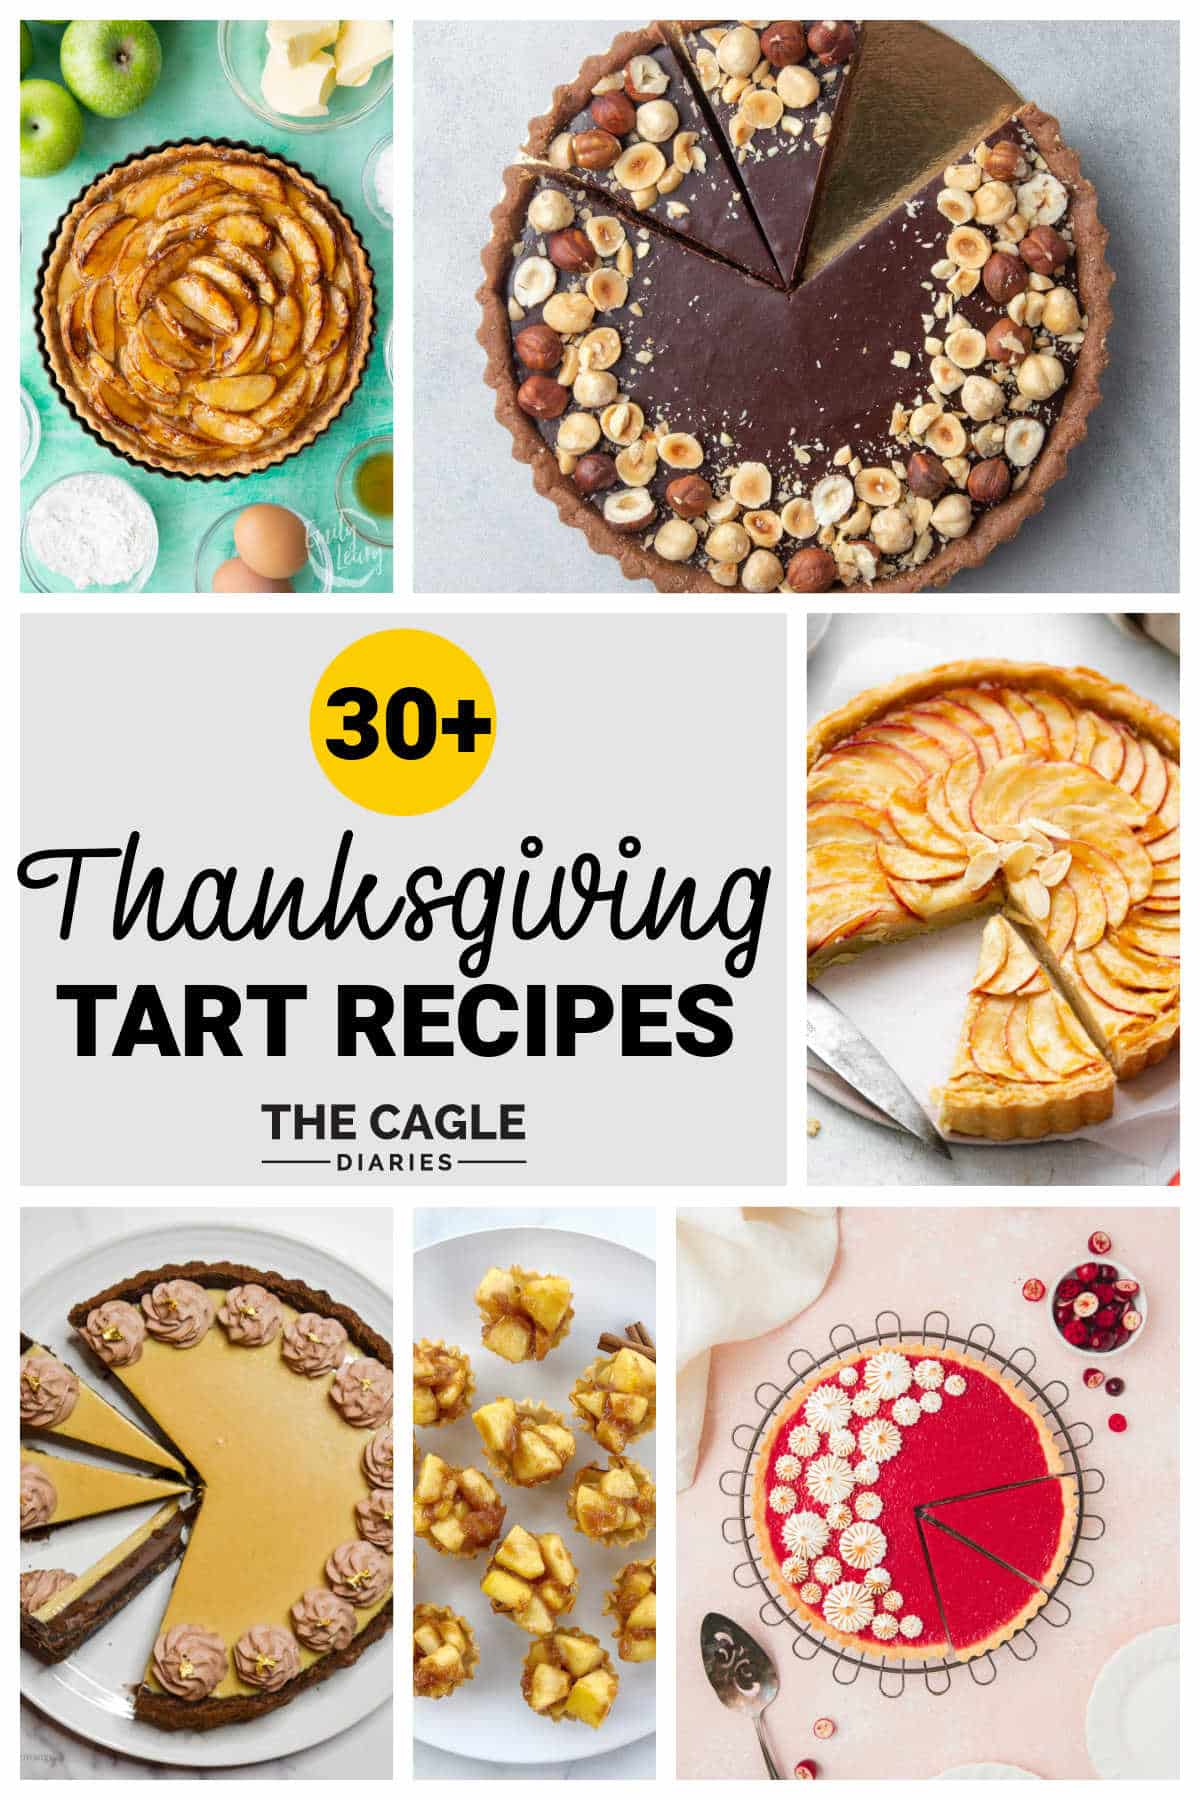 A collage of 6 images showing tart recipes for Thanksgiving.